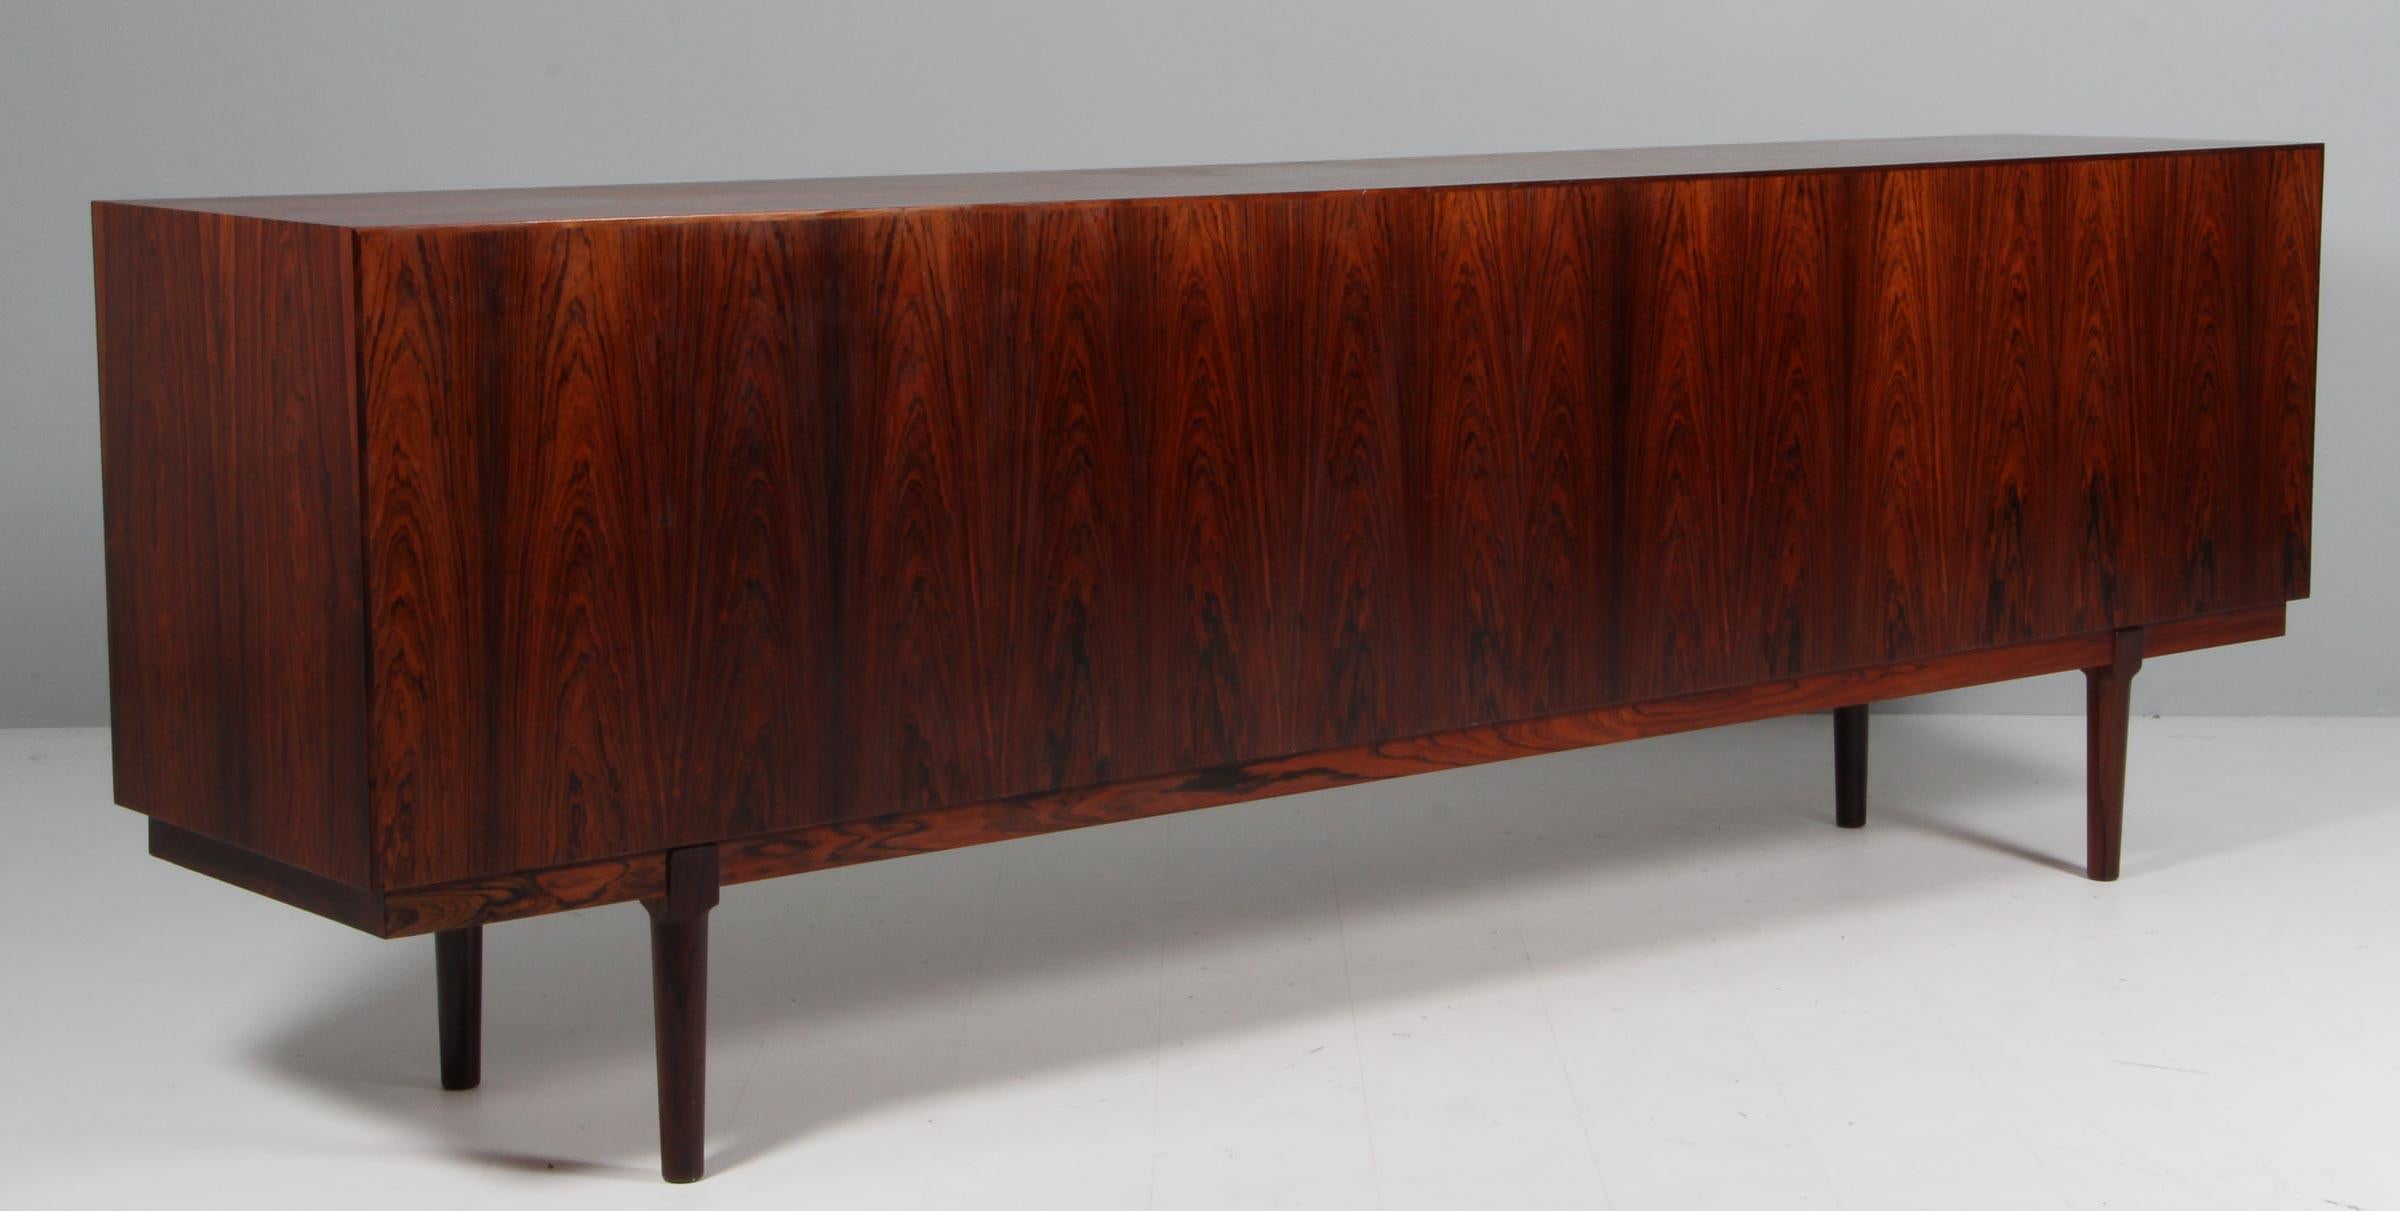 Arne Vodder free standing sideboard / cabinet in partly solid rosewood. 4 doors with locks, drawers and shelfes behind.

Made by Vamo in the 1960s